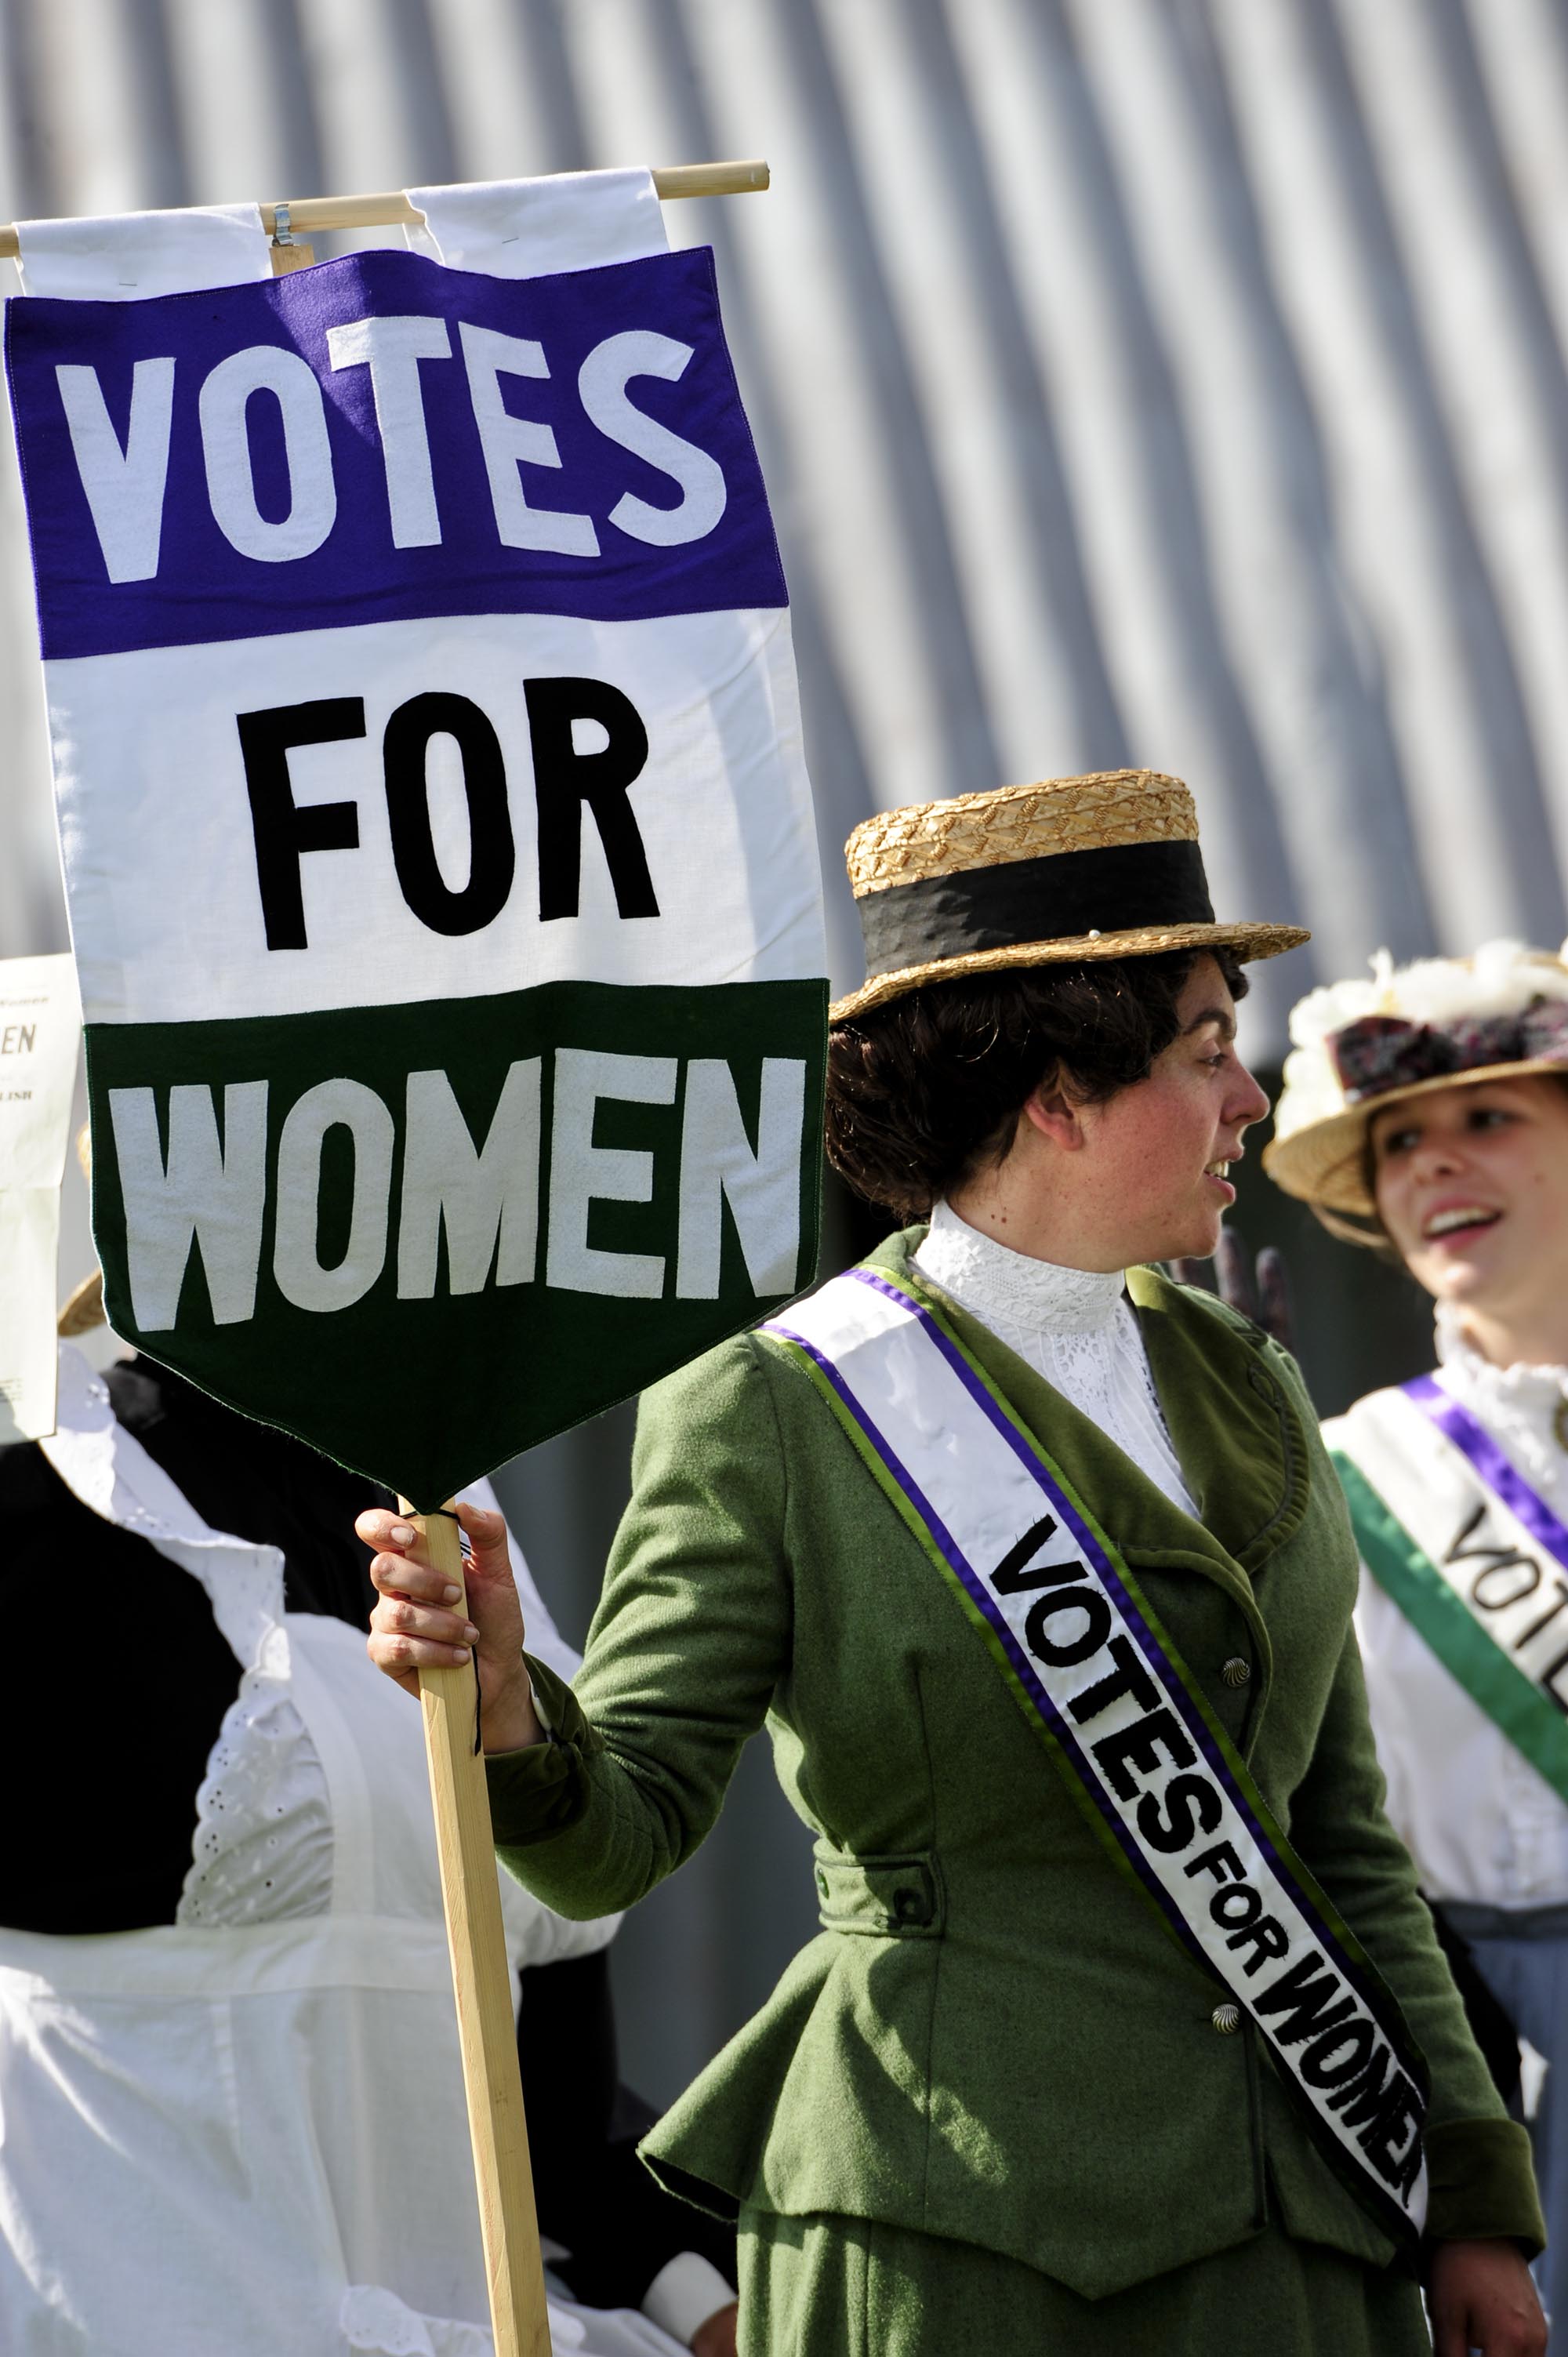 Suffragette with ‘Votes for Women’ banner